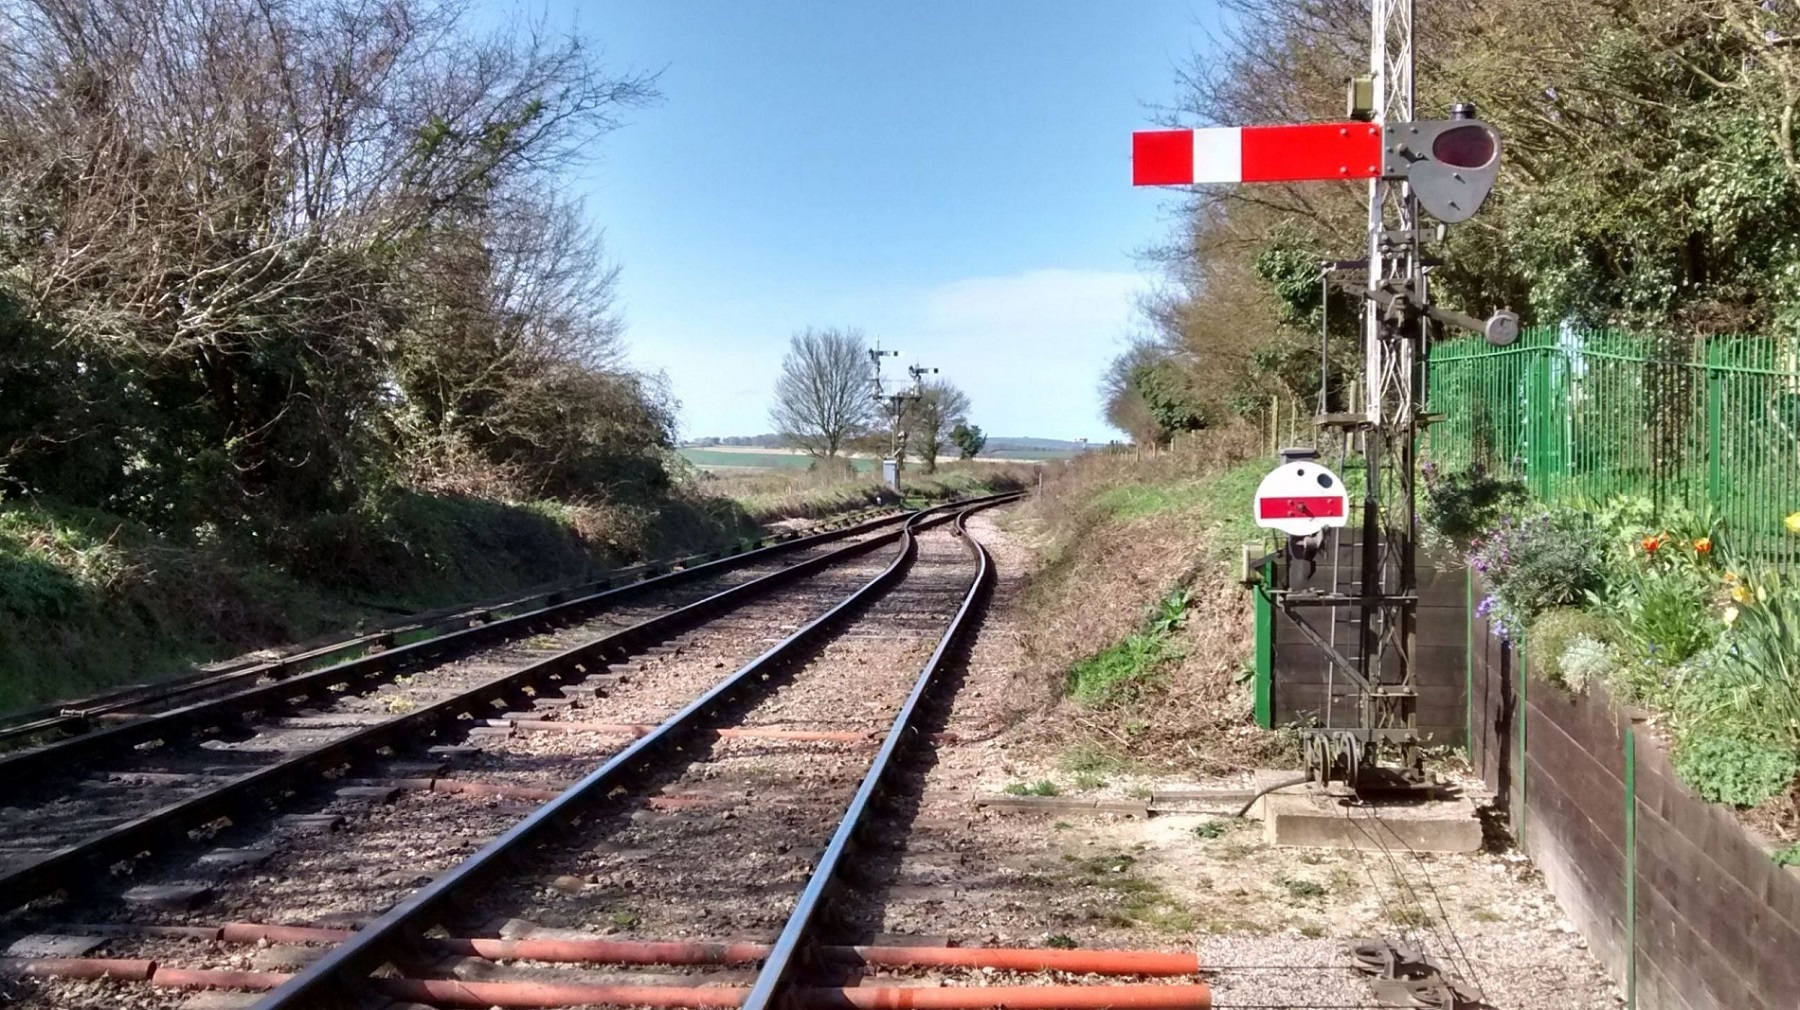 Railway tracks stretch off into the distance under blue sky on a sunny day with a historic signal in the foreground.